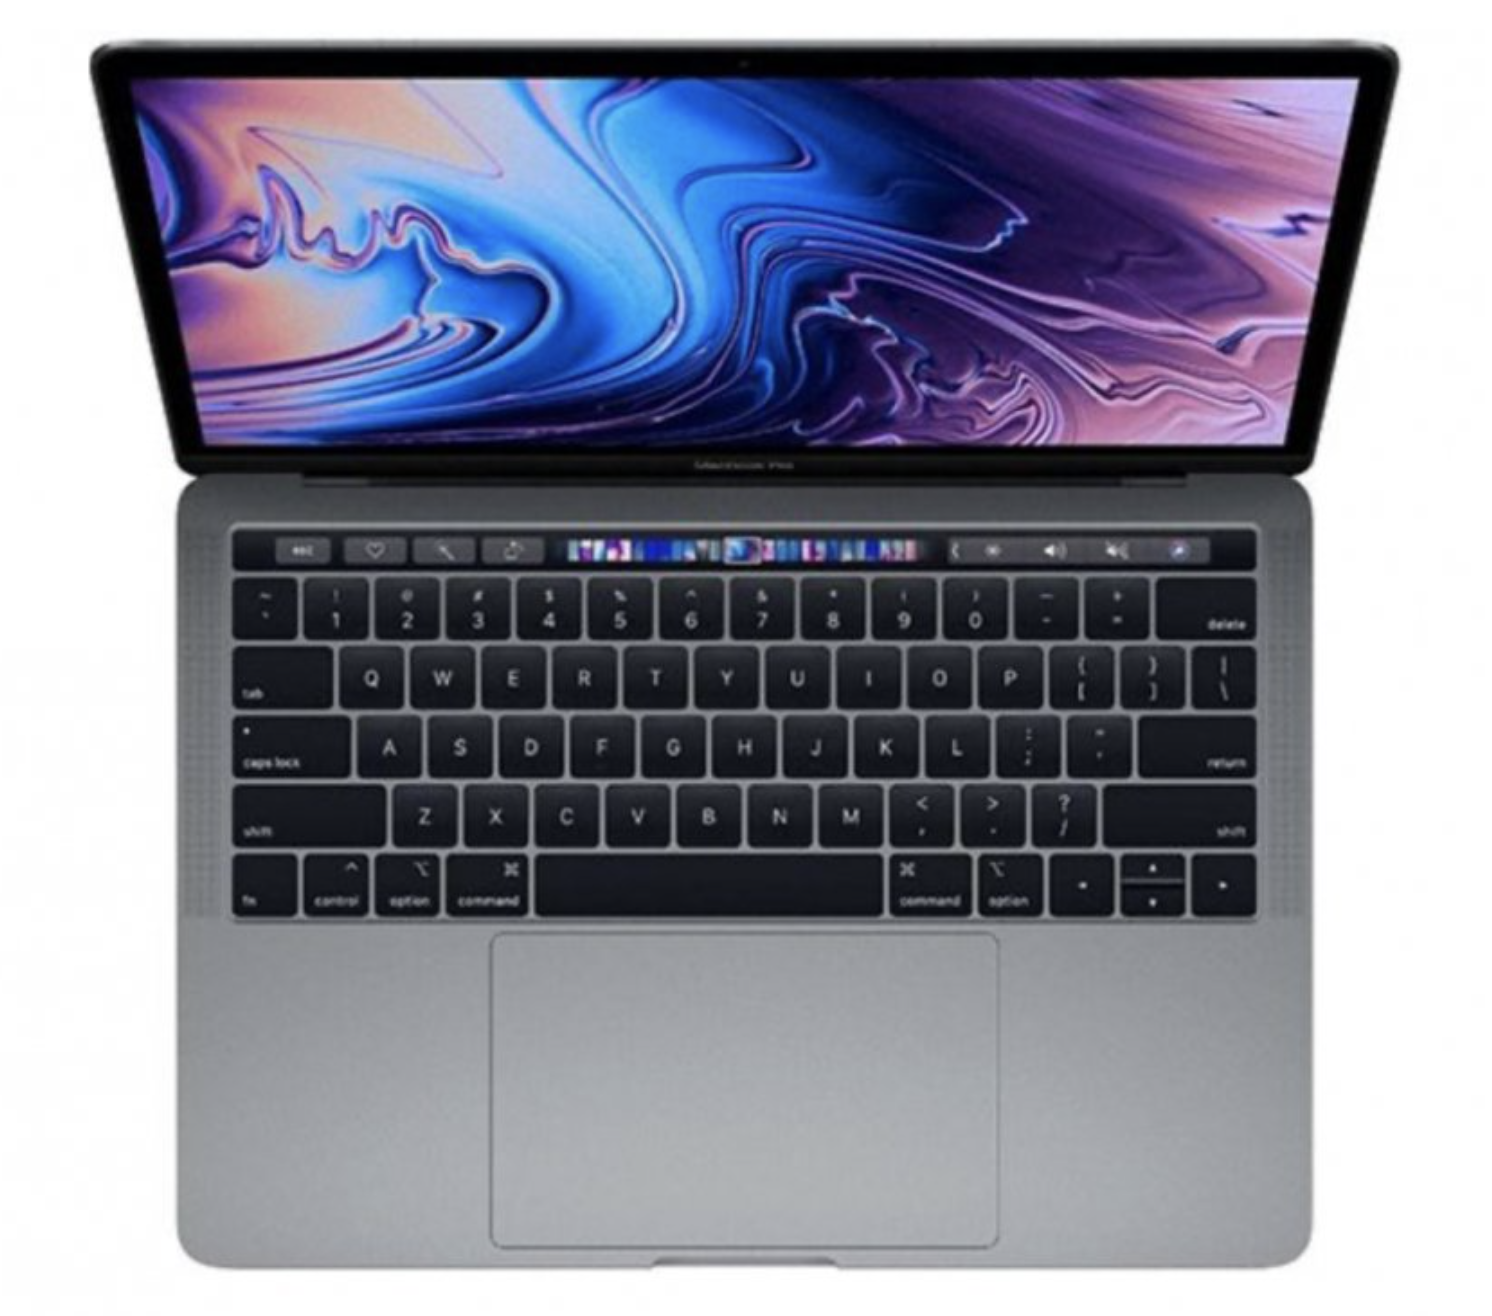 Apple MacBook Pro 13 Touch Bar i5 2,3 GHz 16 GB 512 GB Space Gray 2018